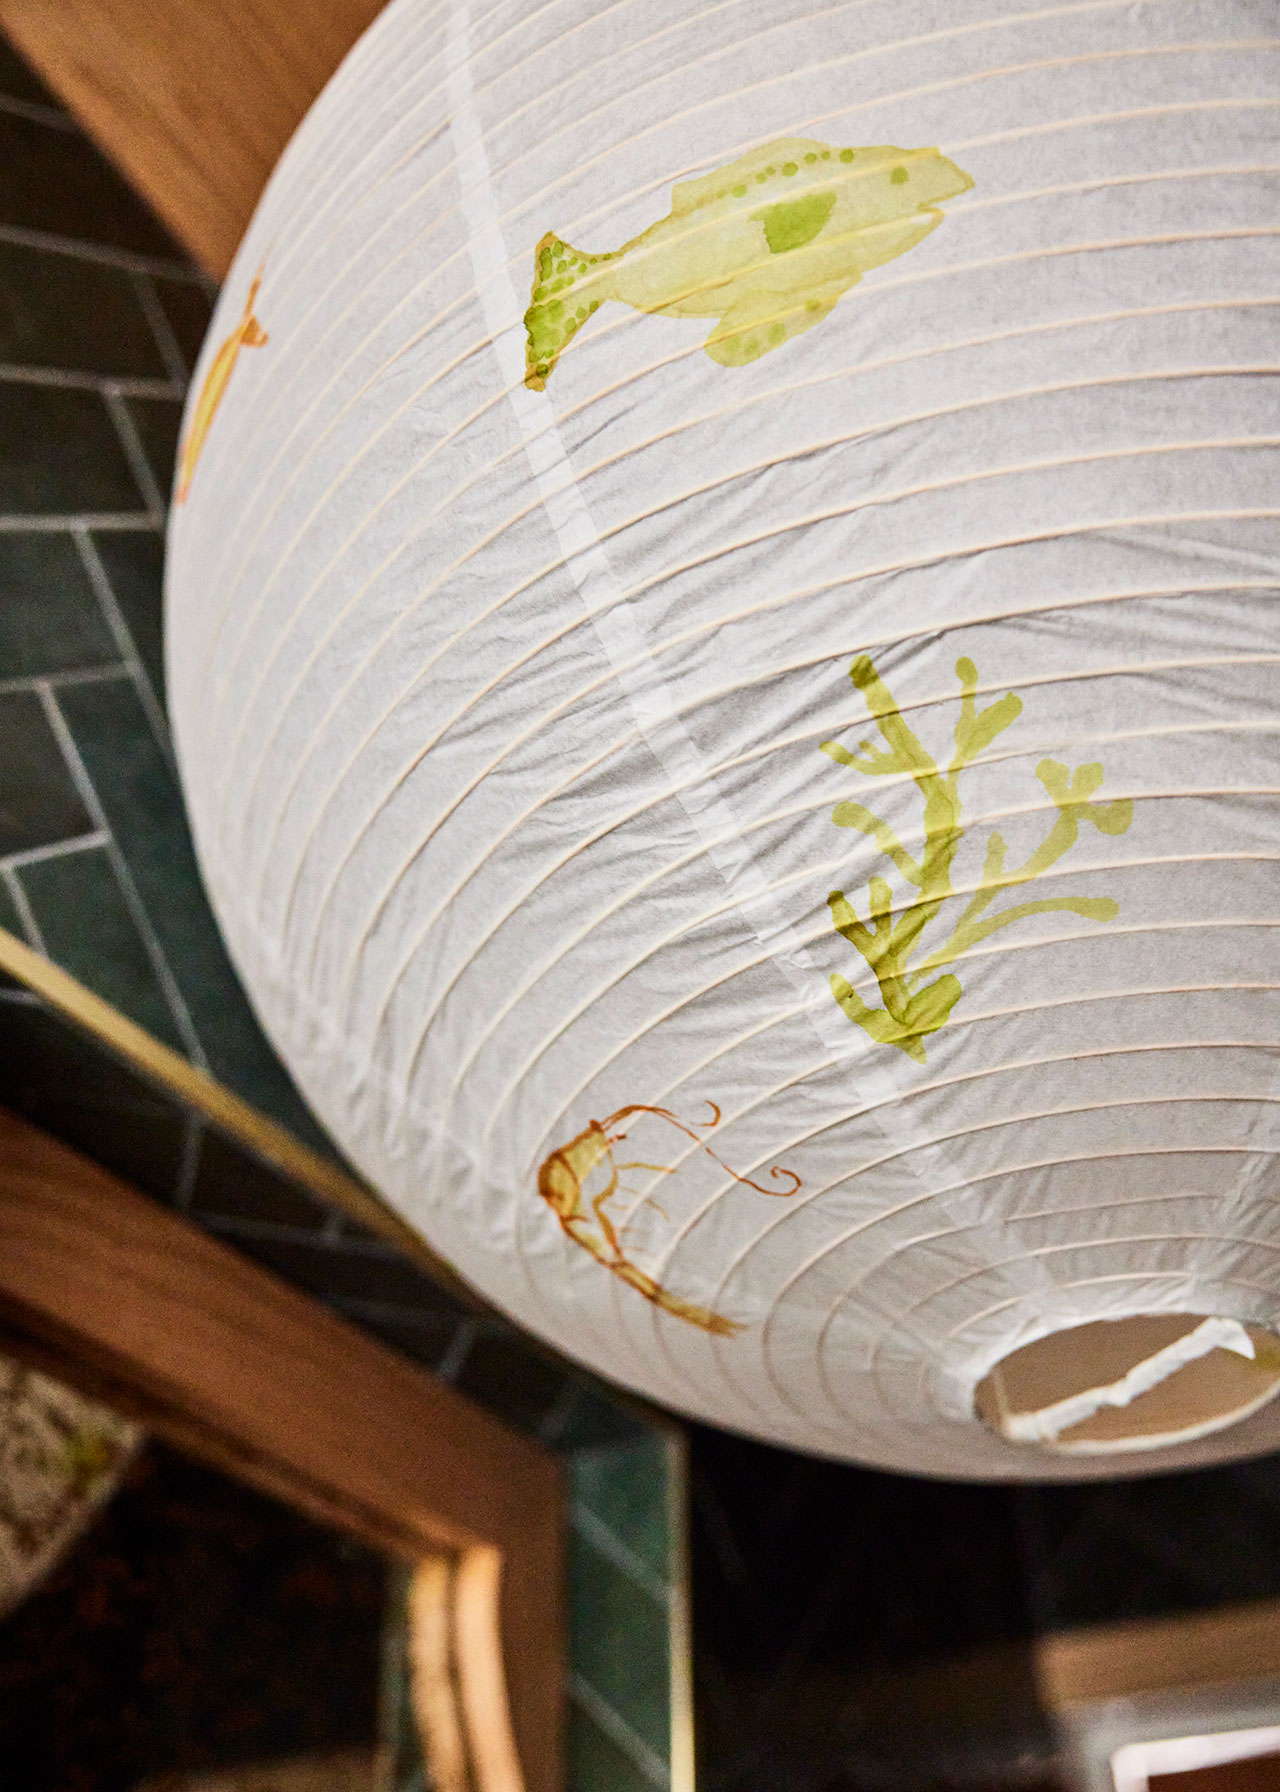 Paper lantern hand-painted by Claire Dufournier.
Photography by Nicole Franzen.